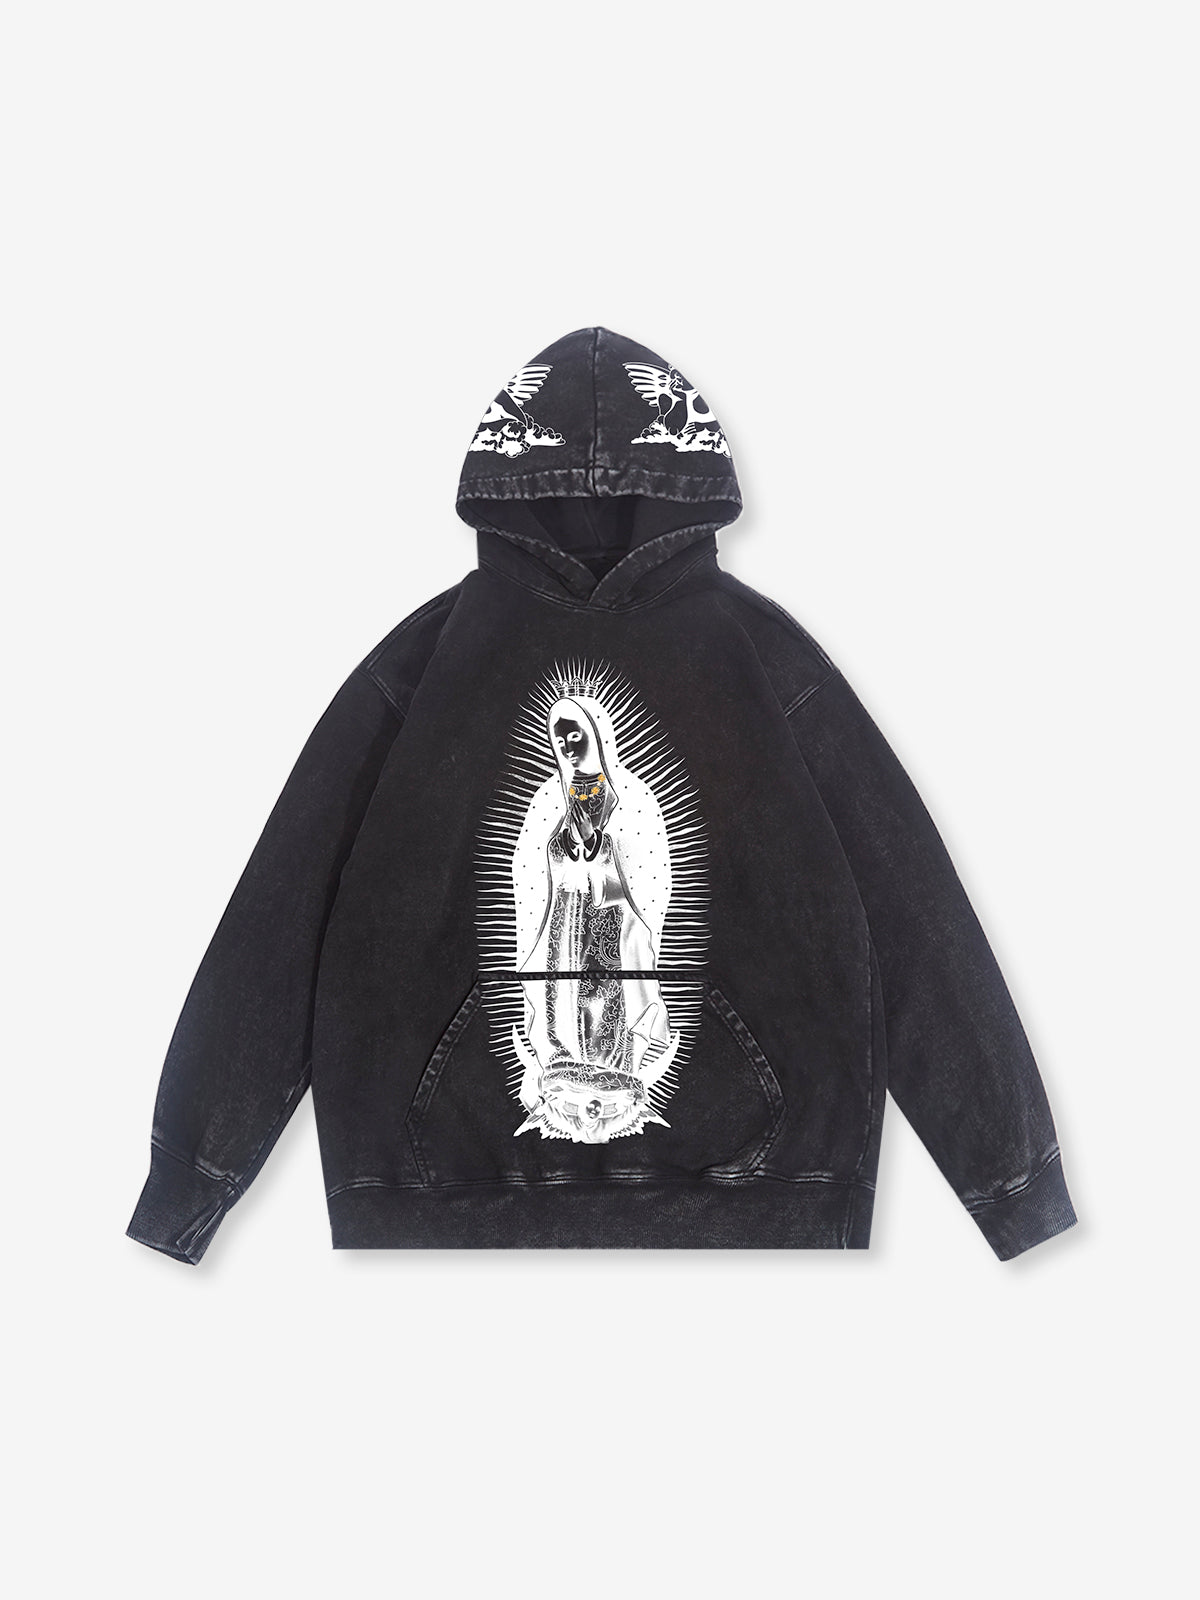 OBSTACLES & DANGERS©350g Four-Color Guadalupe Print Hoodie